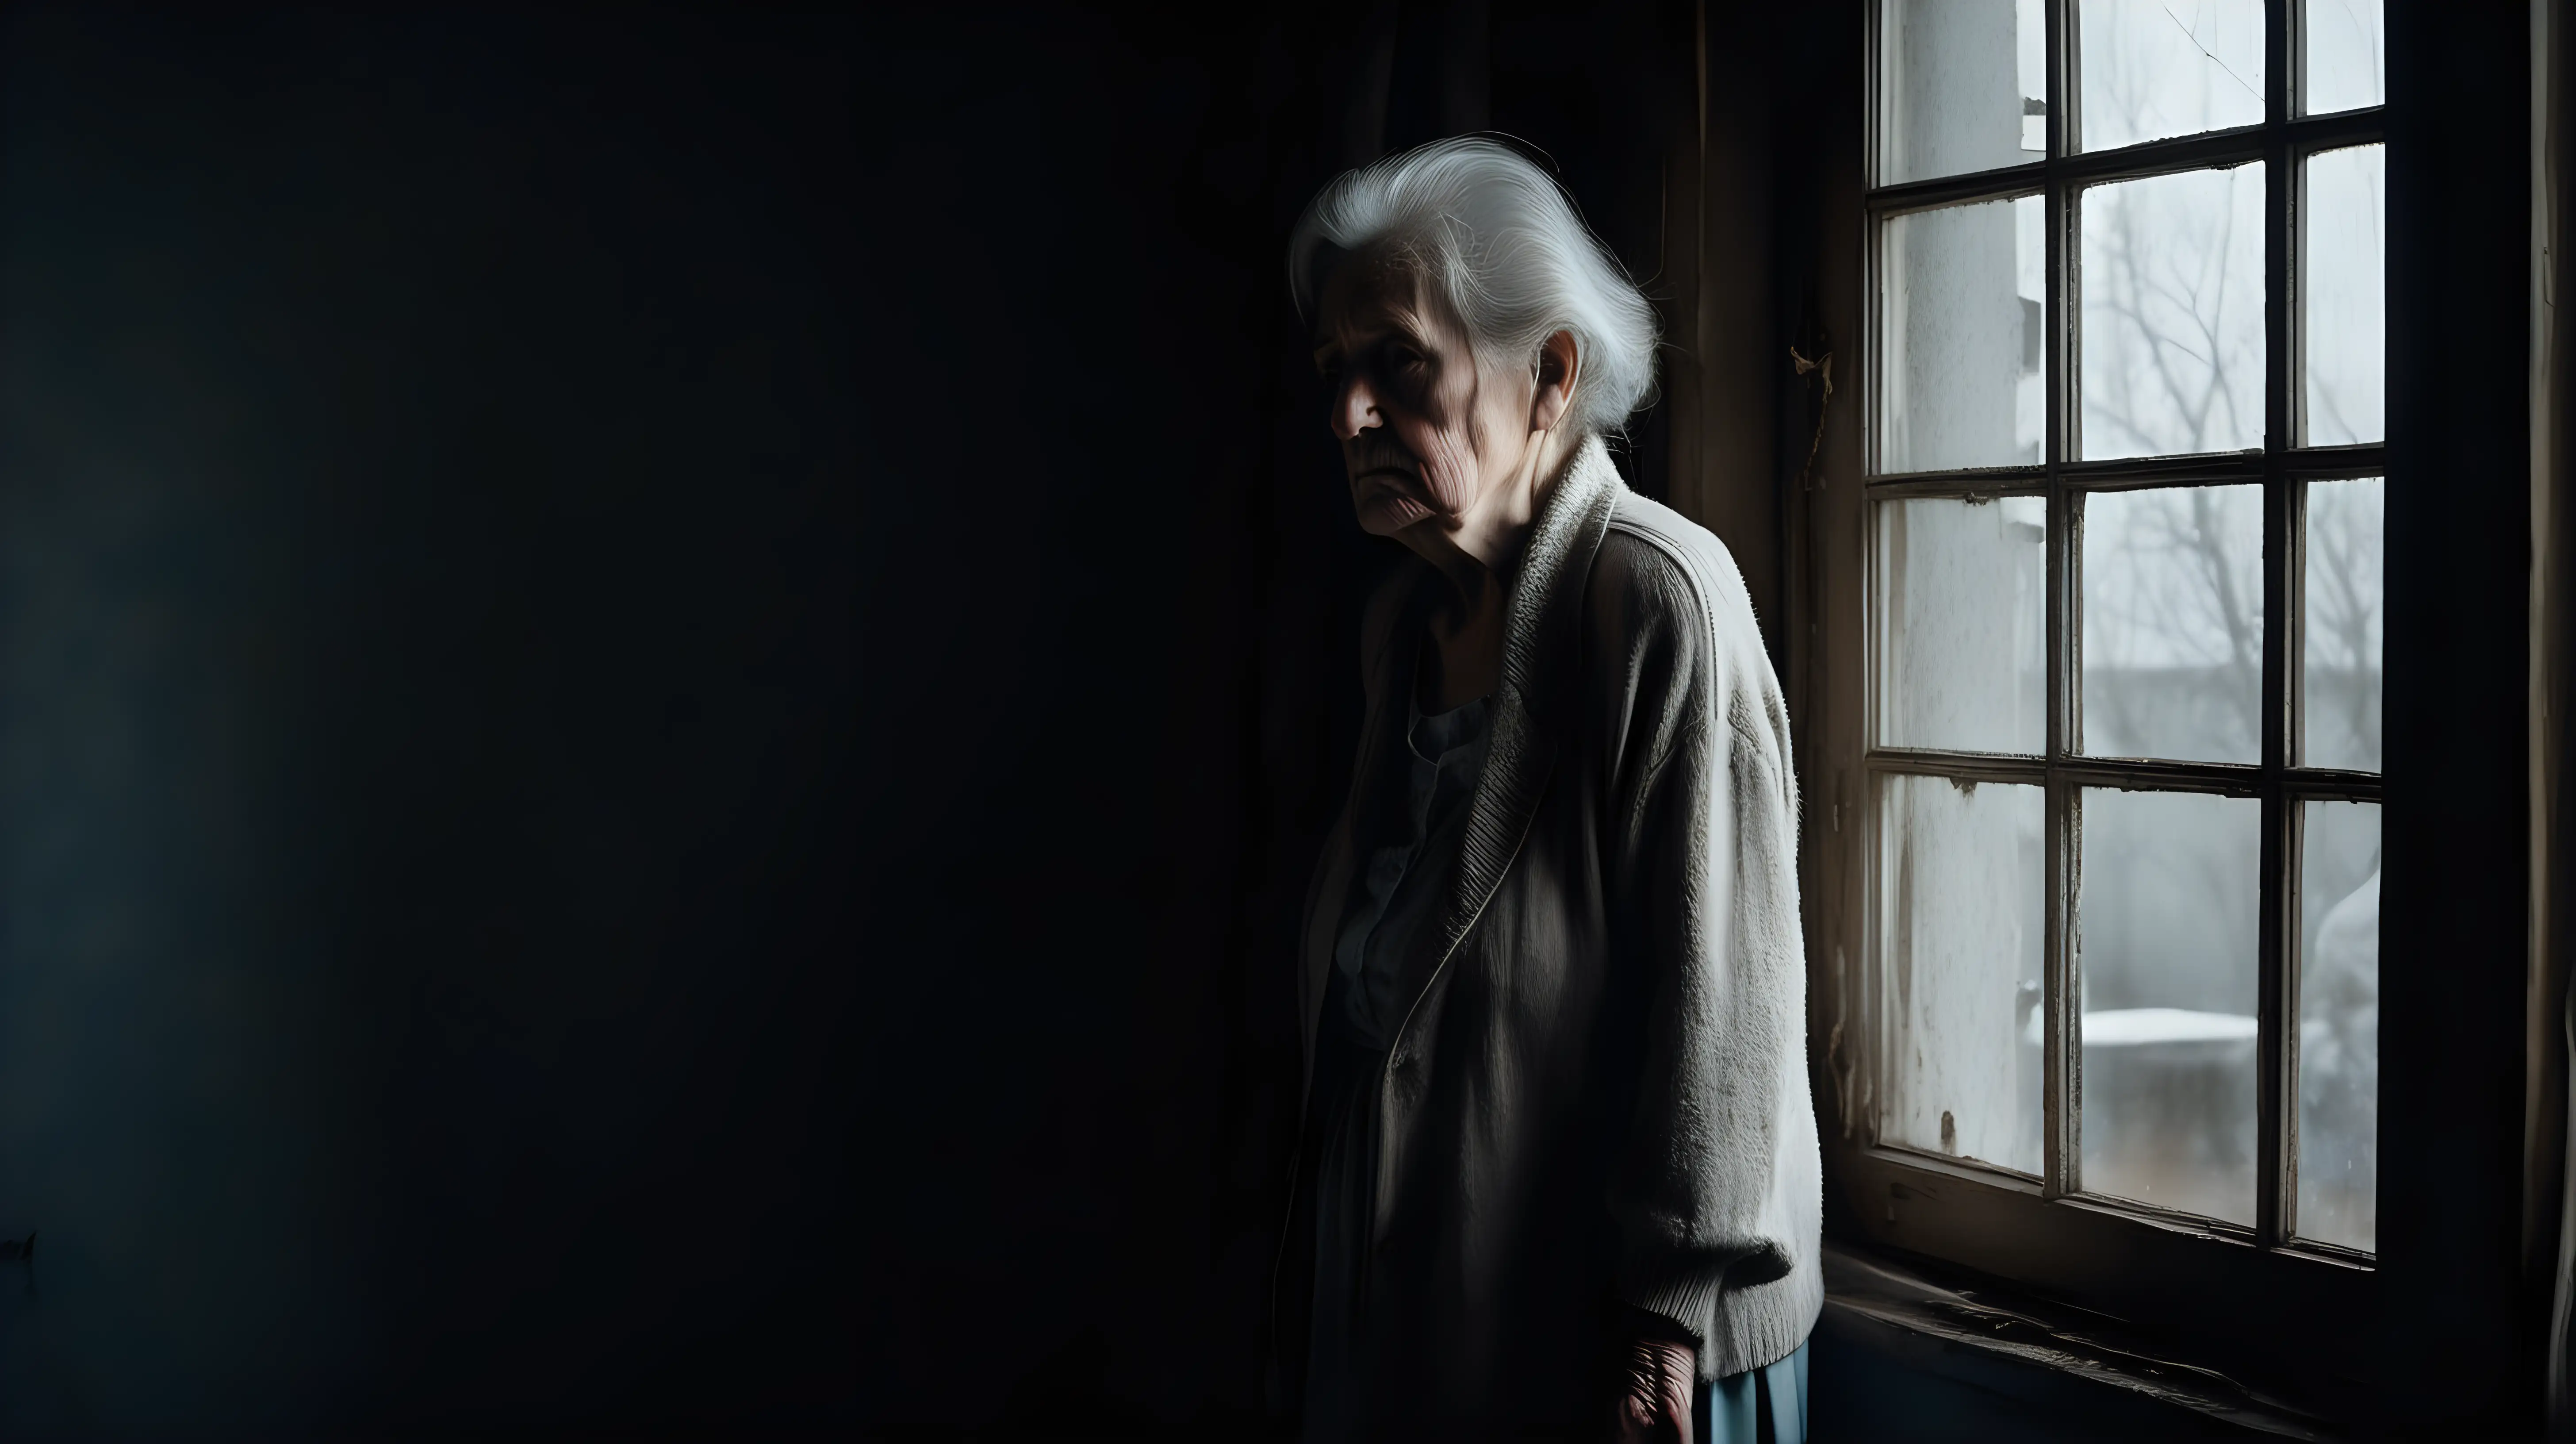 Beauty old women sad standing in front of window alone darkness soft light large old room mess
